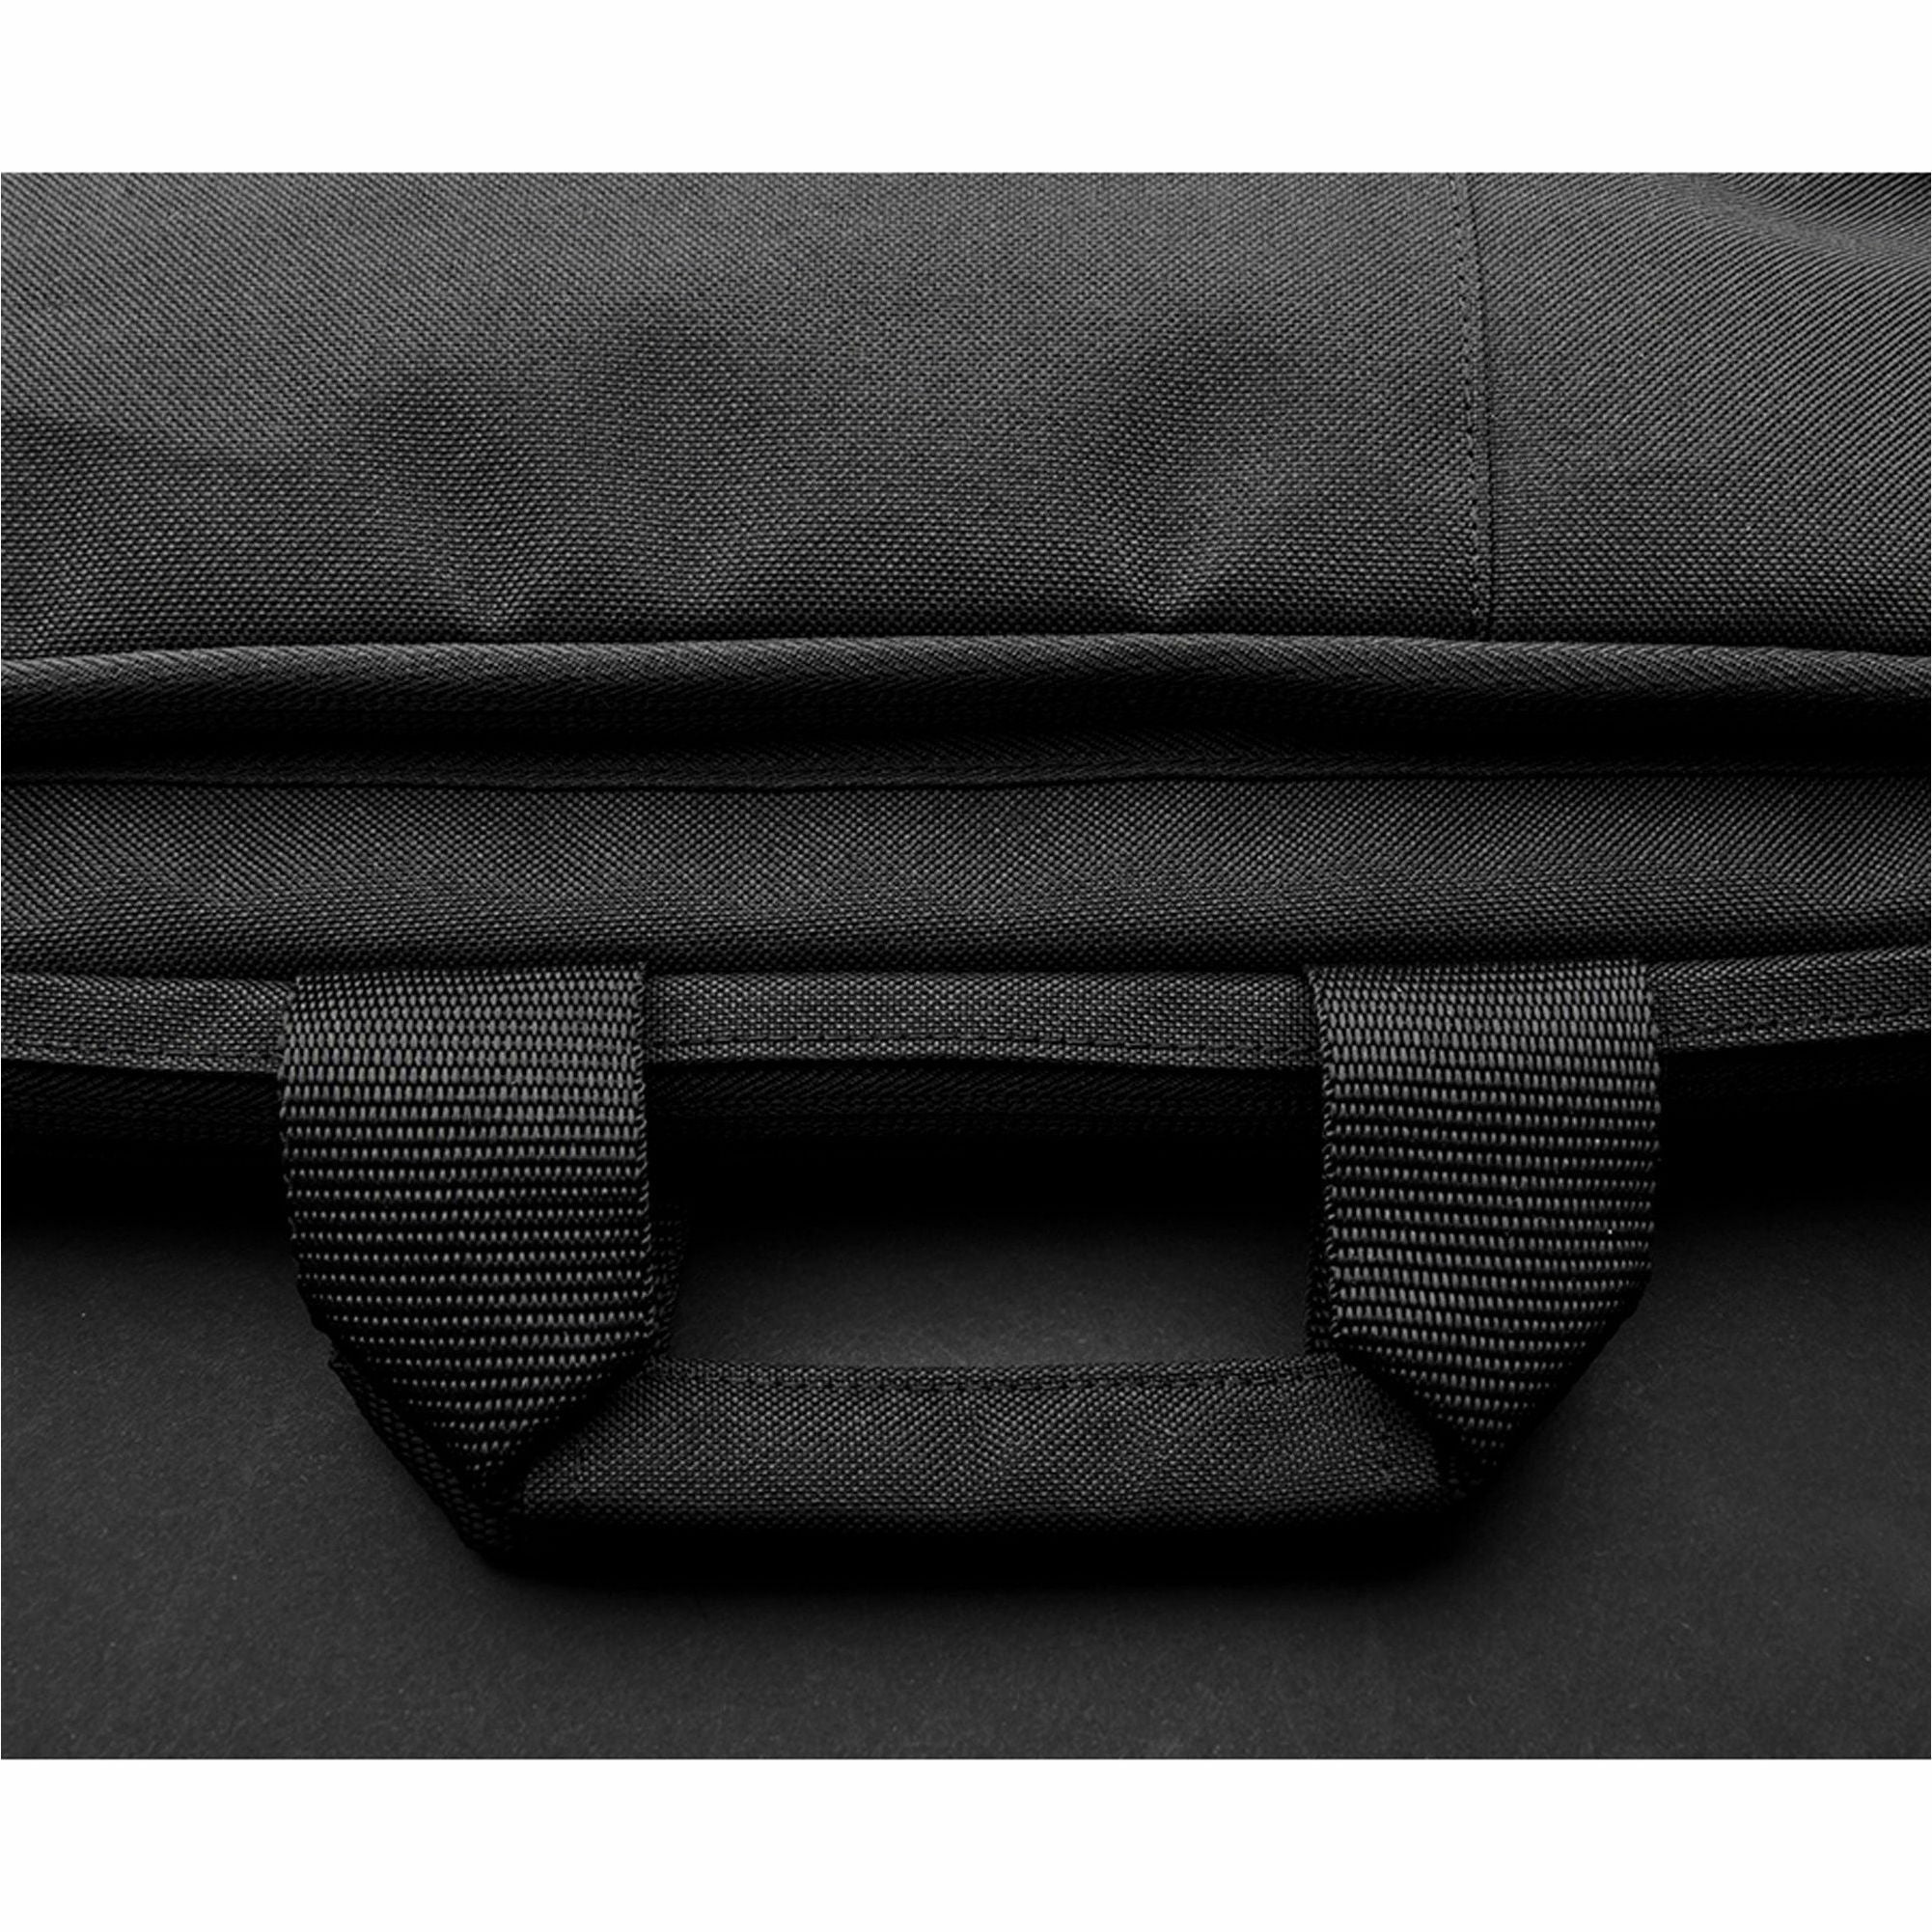 solo-carrying-case-for-116-chromebook-notebook-black-drop-resistant-bacterial-resistant-water-resistant-fabric-body-handle-1-each_uslpro1534 - 3